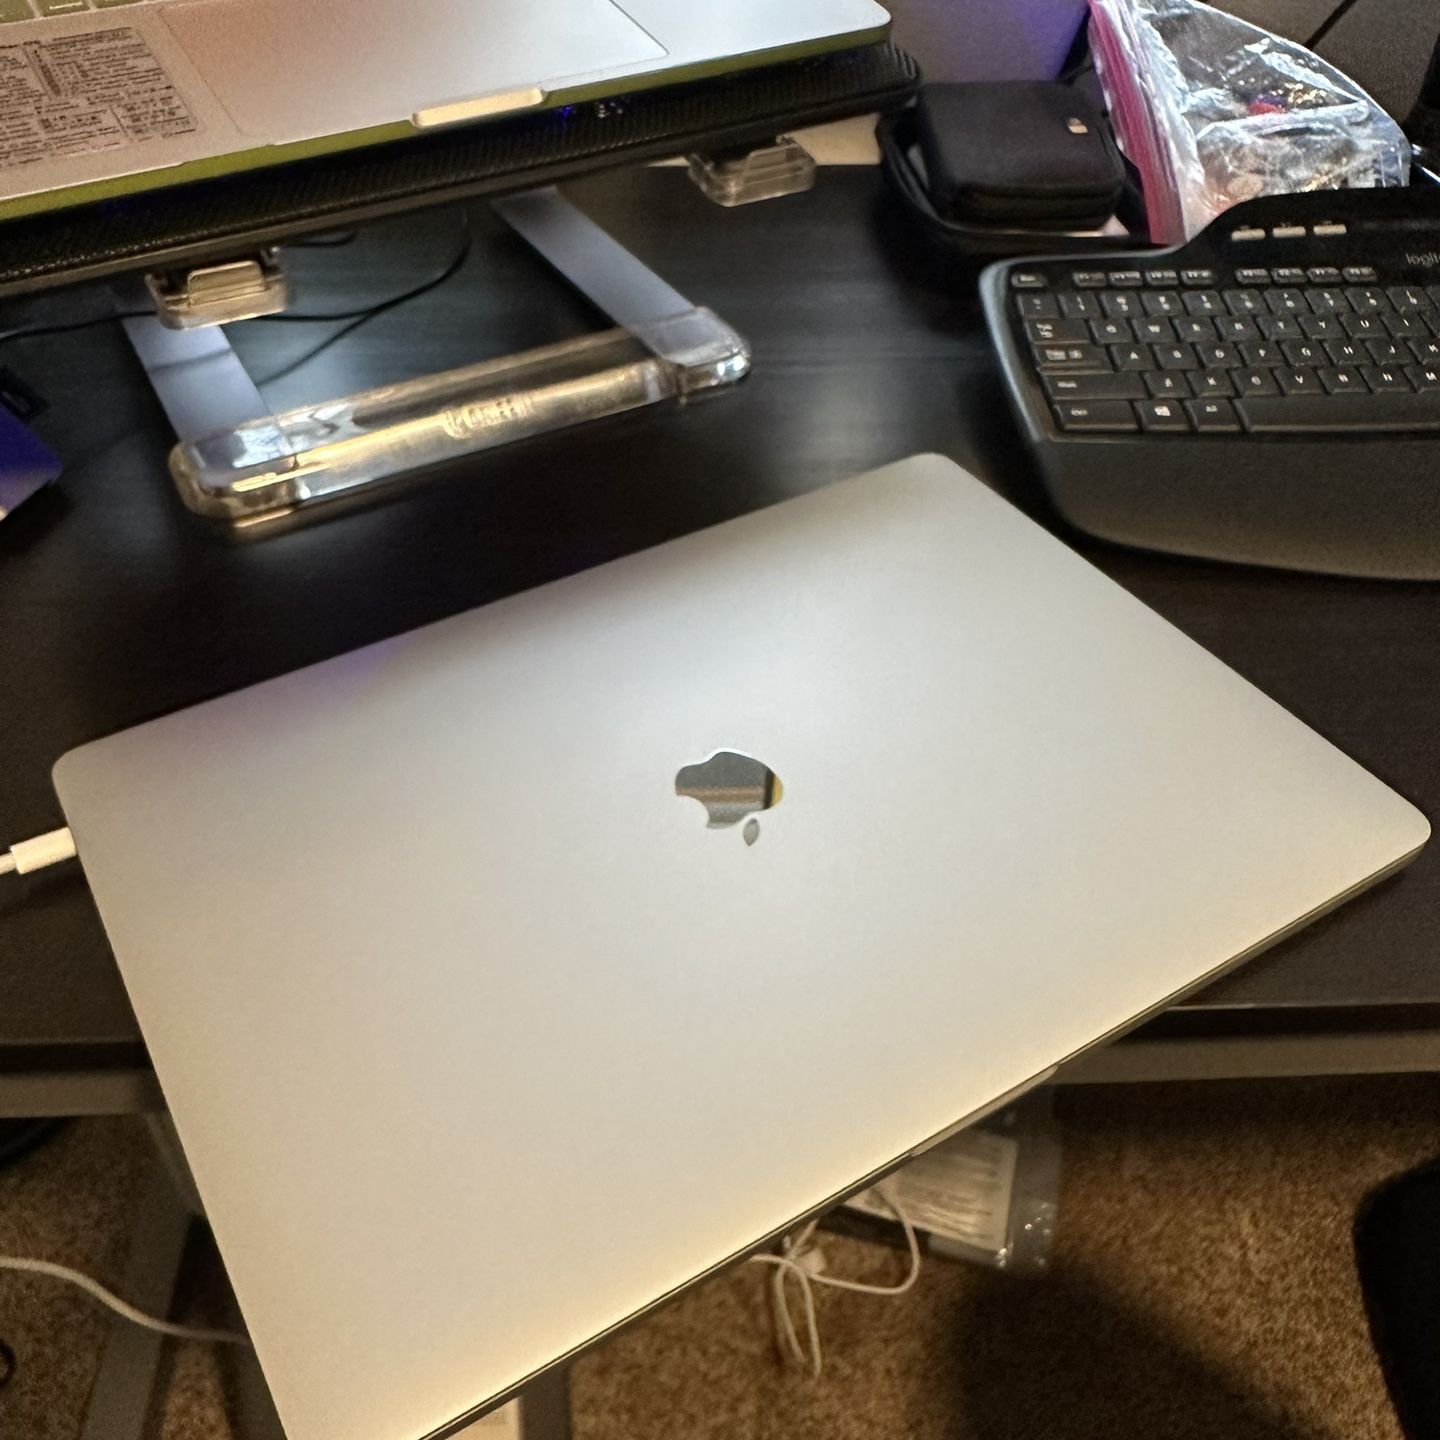 MacBook Pro 16in with 2.6GHz 9th Gen Intel Core i7 